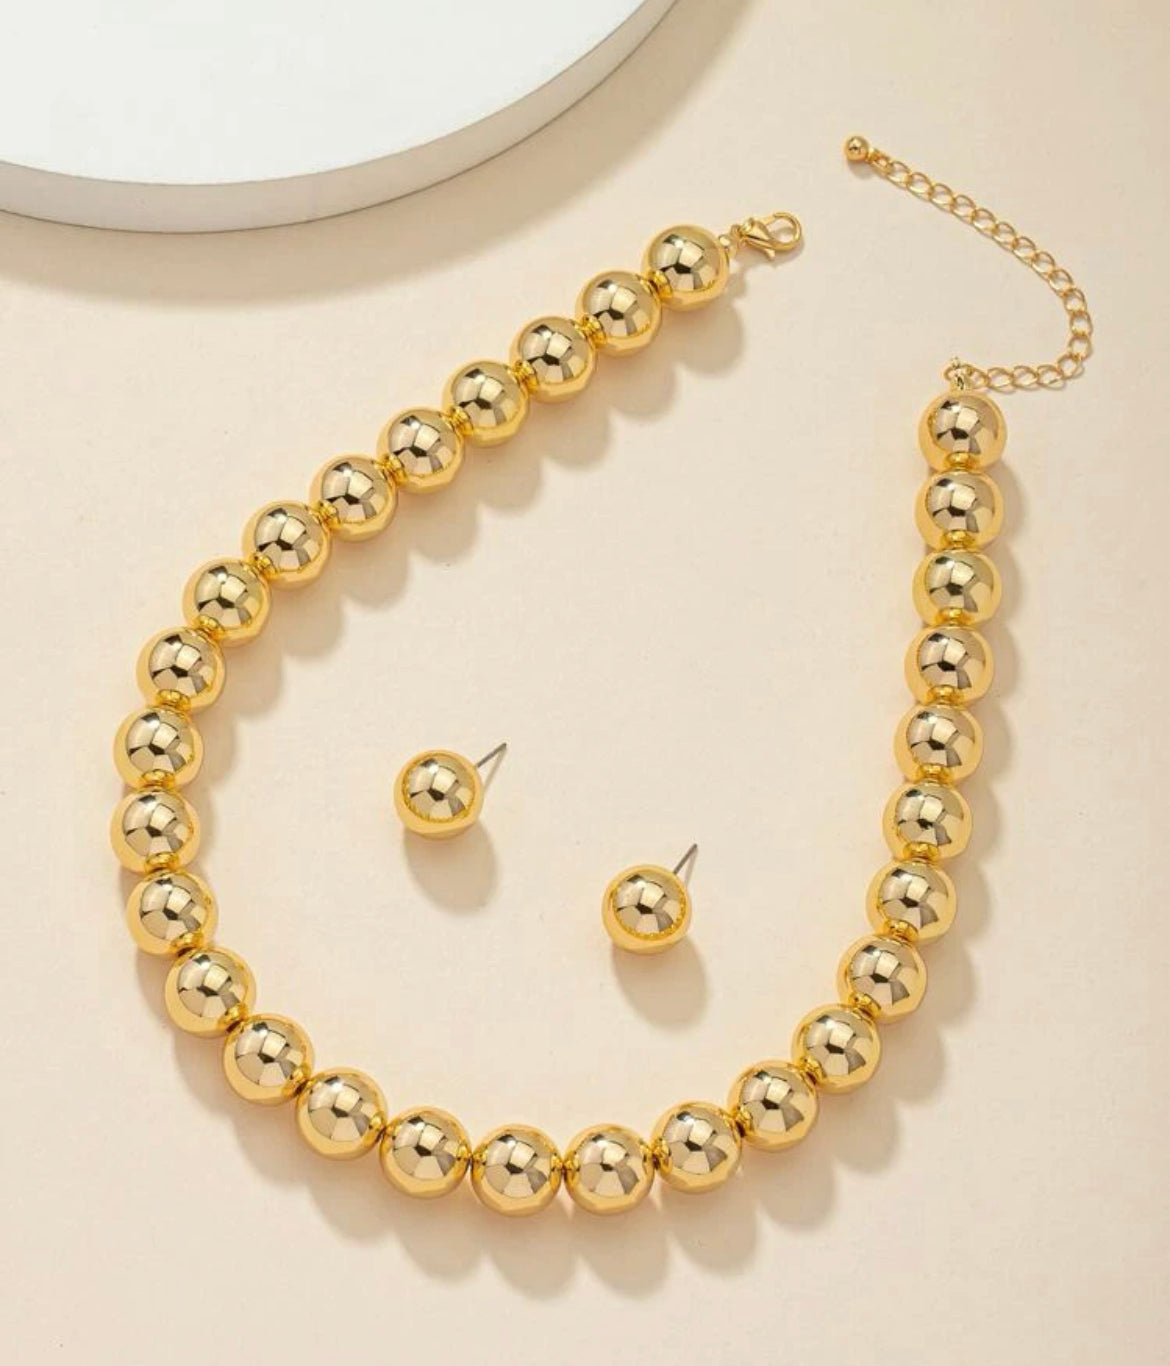 PEARL NECKLACE SET